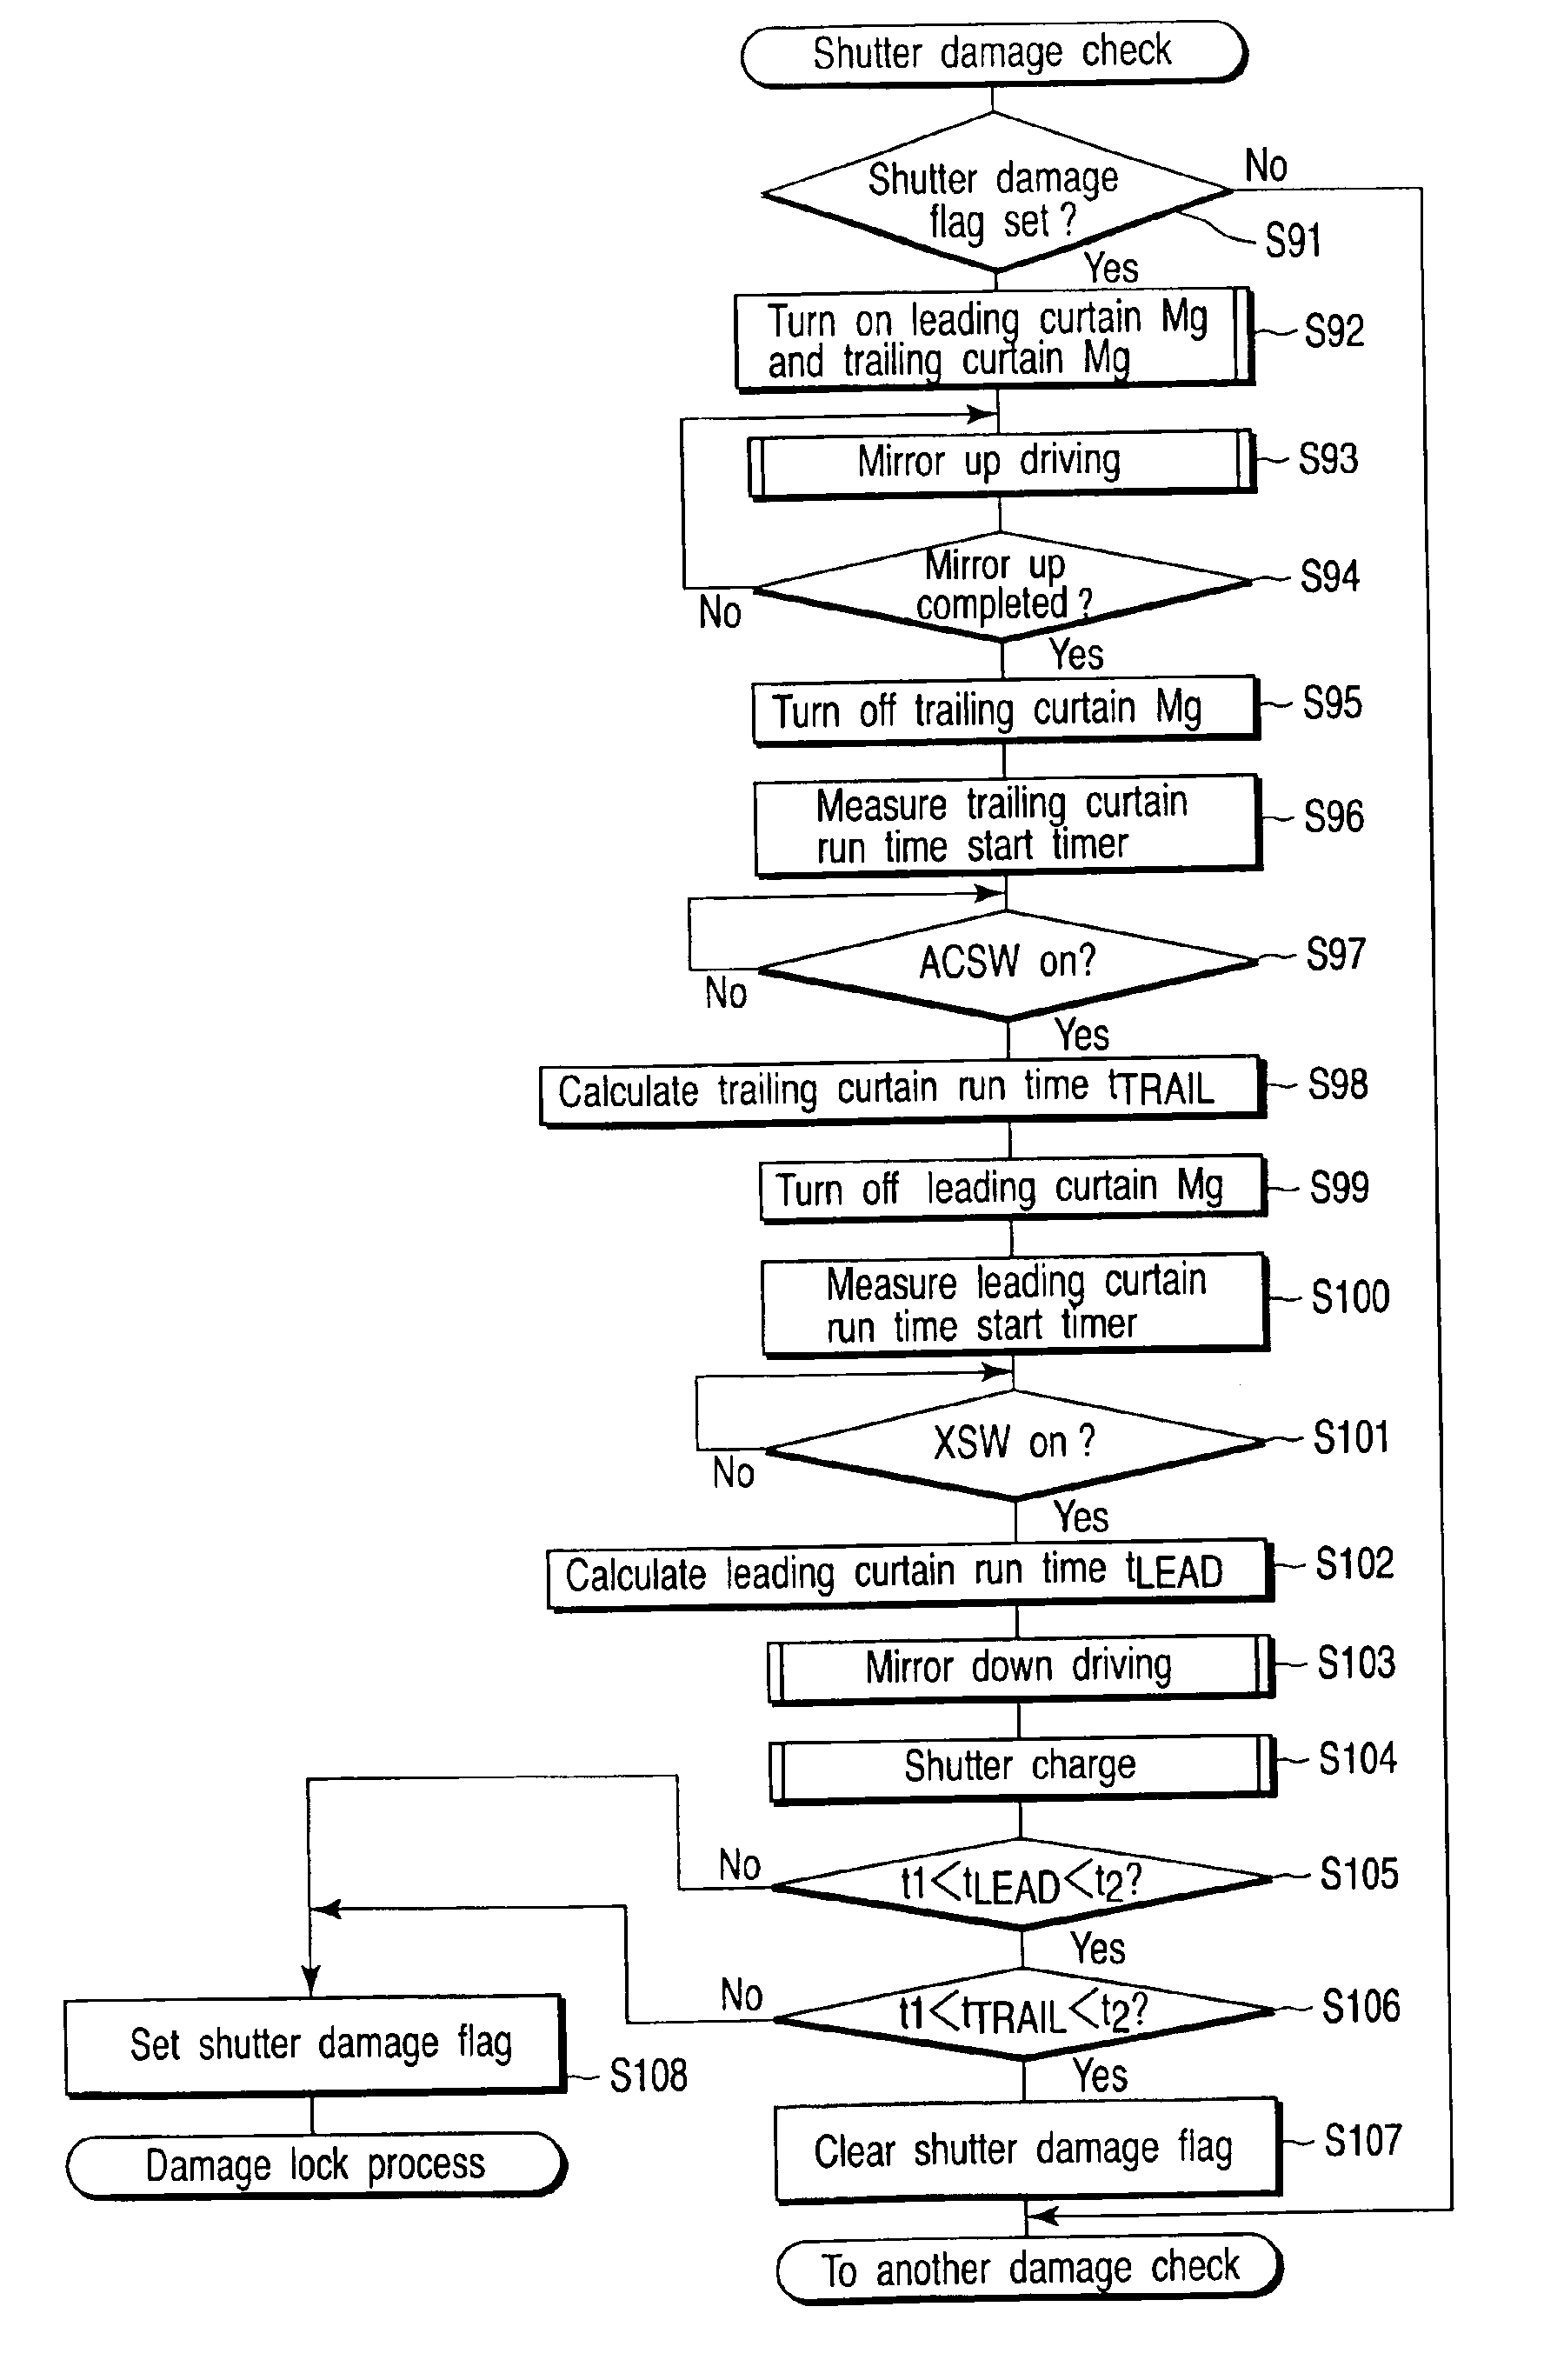 Shutter abnormality detection apparatus for camera